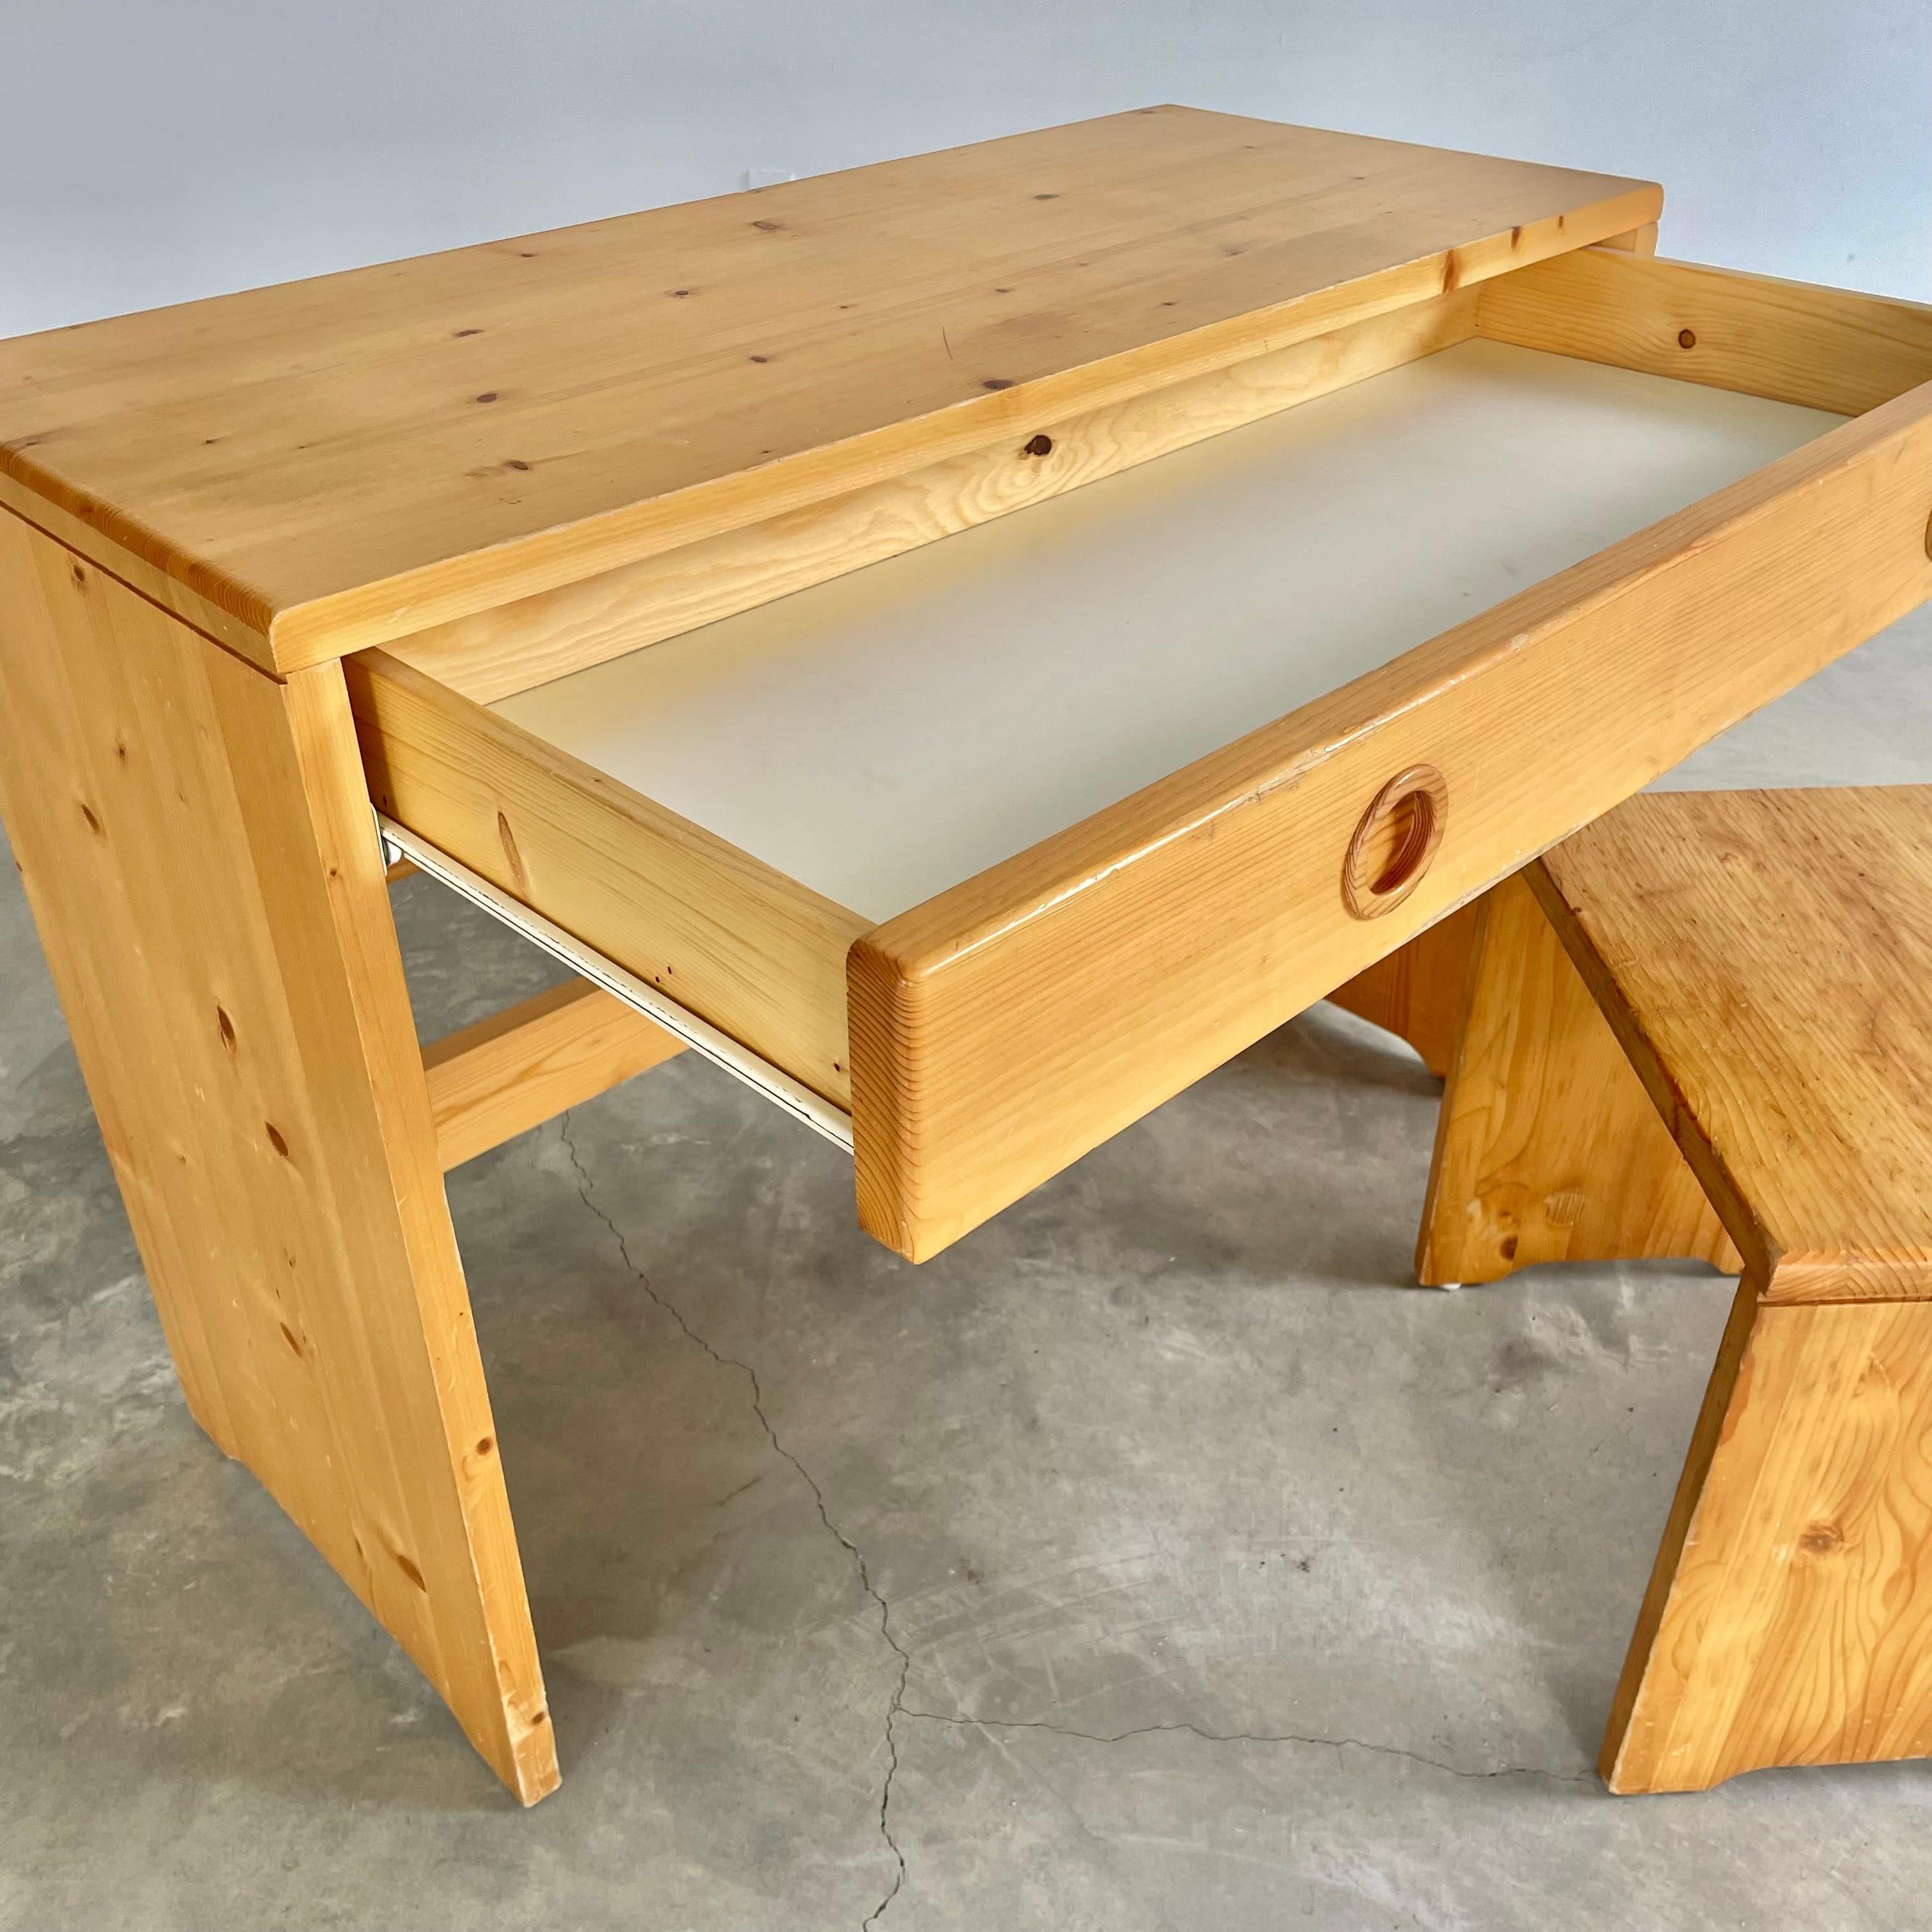 Charlotte Perriand Pine Desk for Les Arcs with Matching Stool, 1960s France For Sale 3